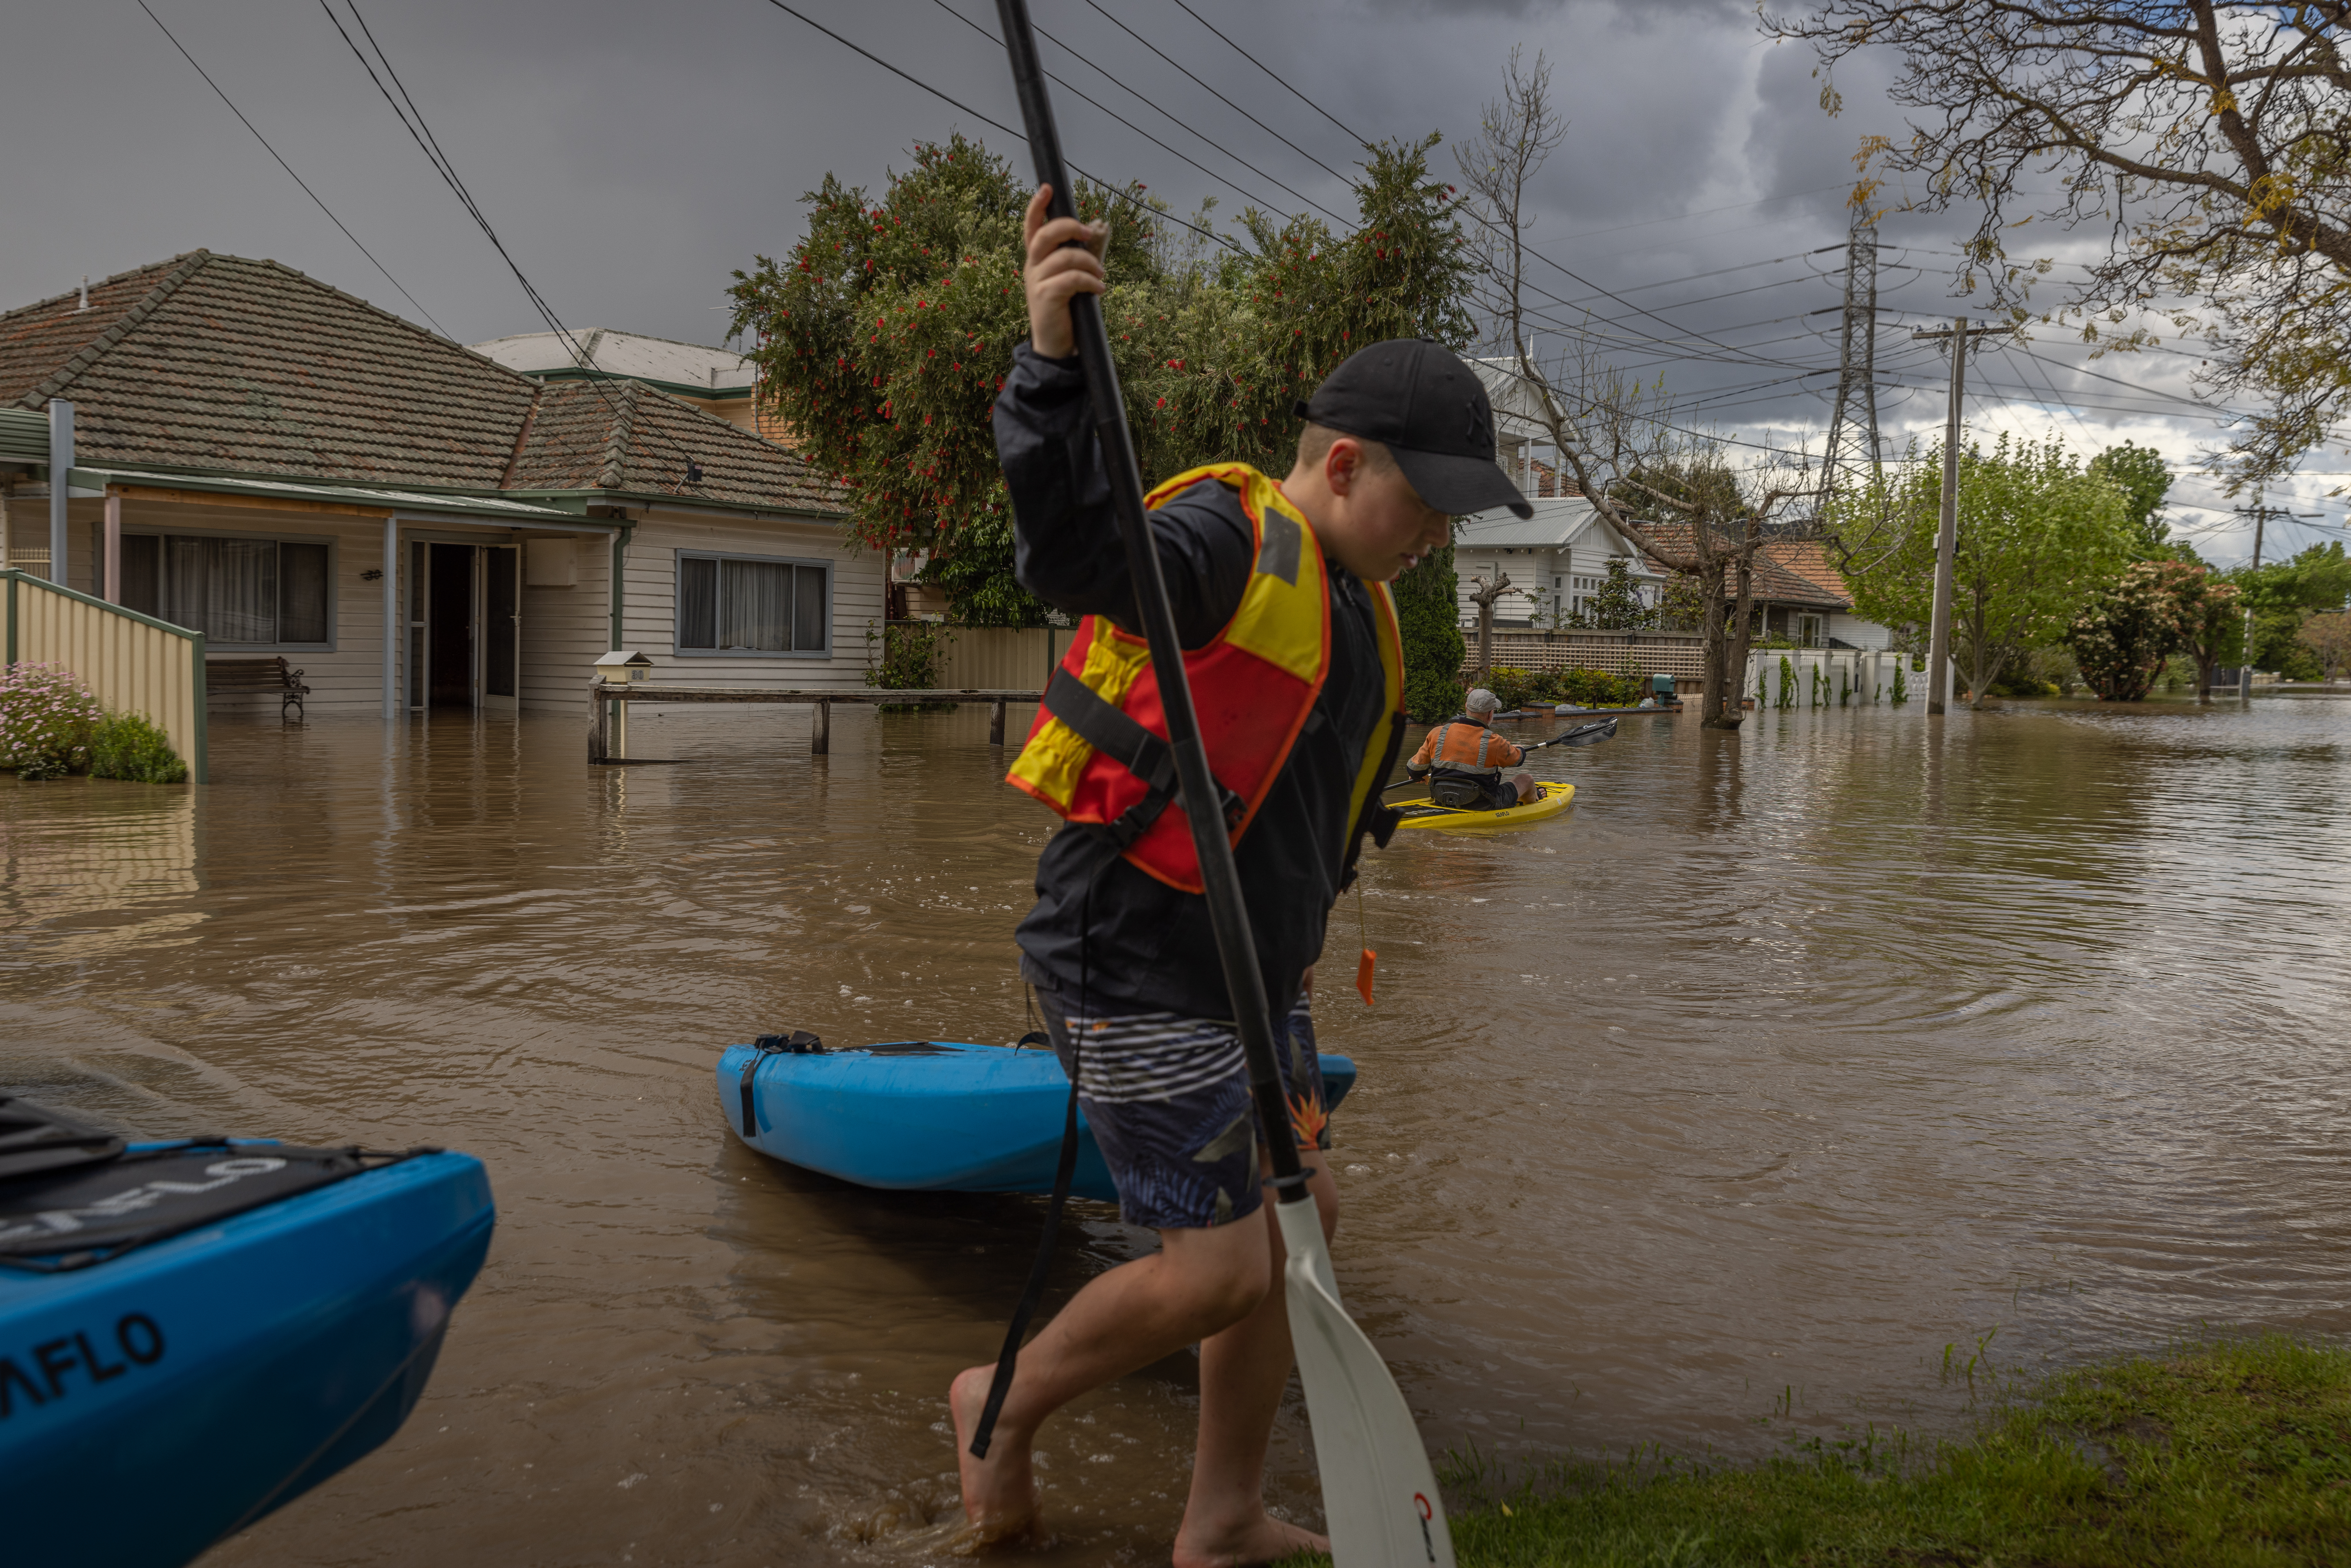 A resident canoeing down a flooded street